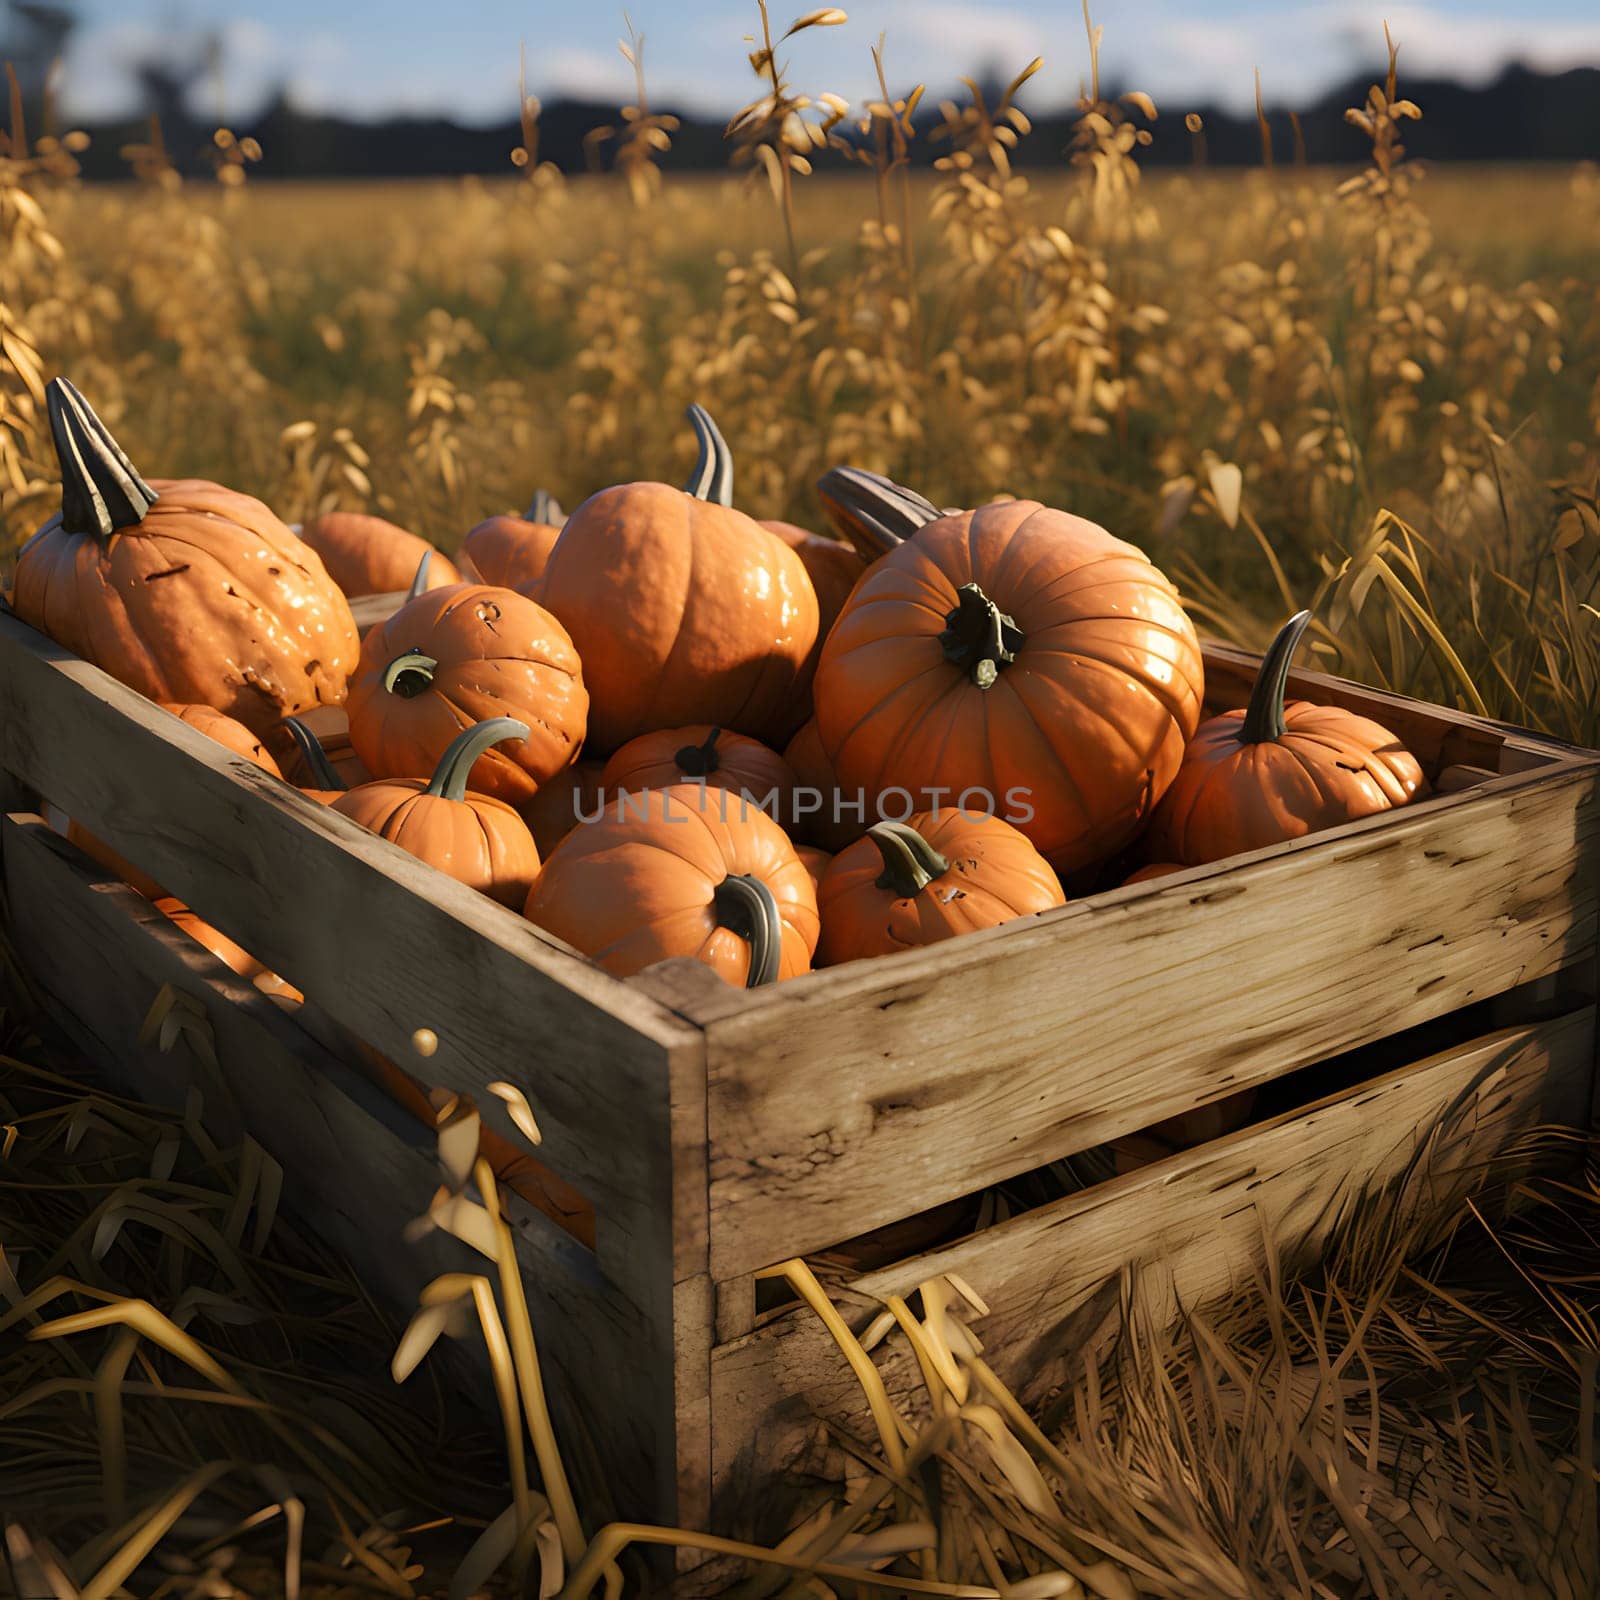 Small orange pumpkins in a wooden box in a field. Pumpkin as a dish of thanksgiving for the harvest. An atmosphere of joy and celebration.